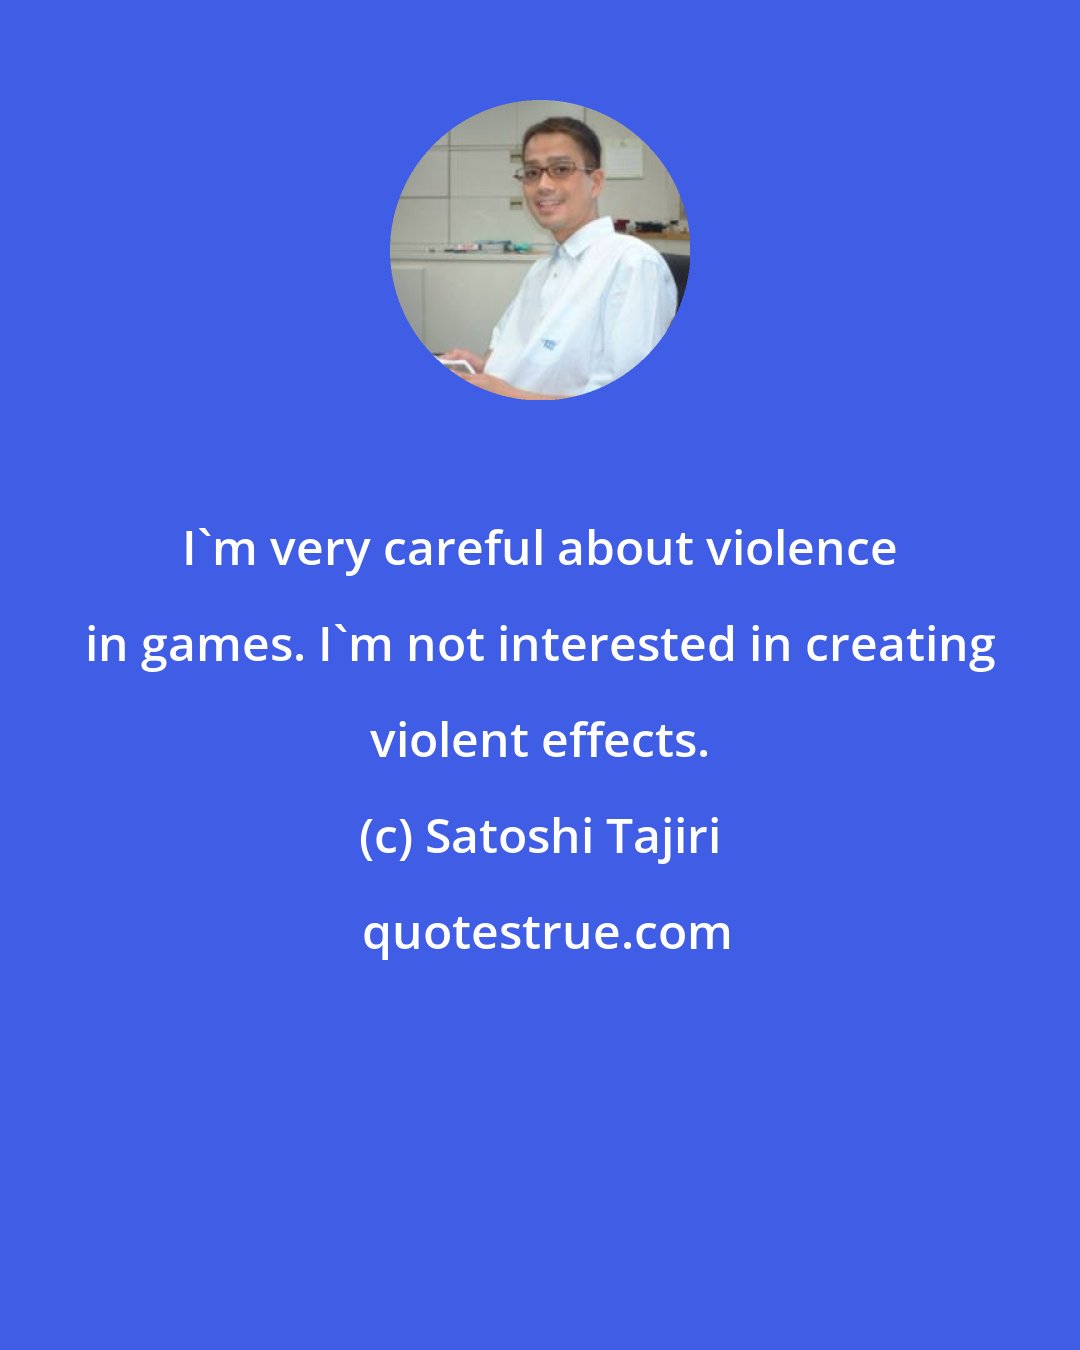 Satoshi Tajiri: I'm very careful about violence in games. I'm not interested in creating violent effects.